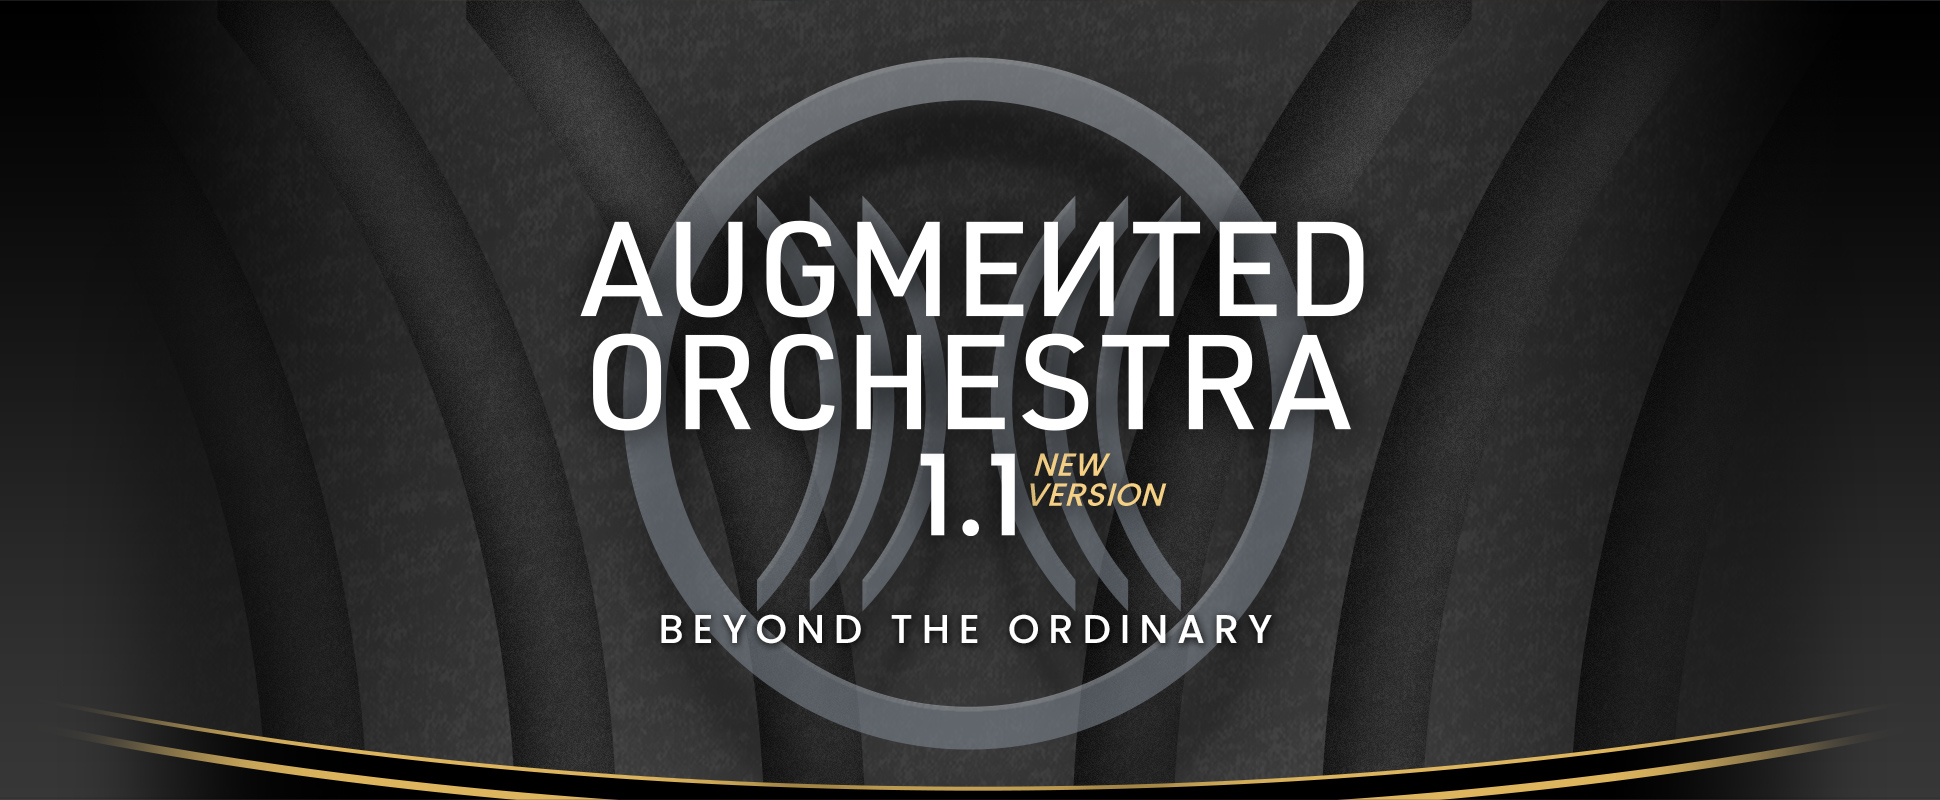 Augmented Orchestra 1.1 - NEW